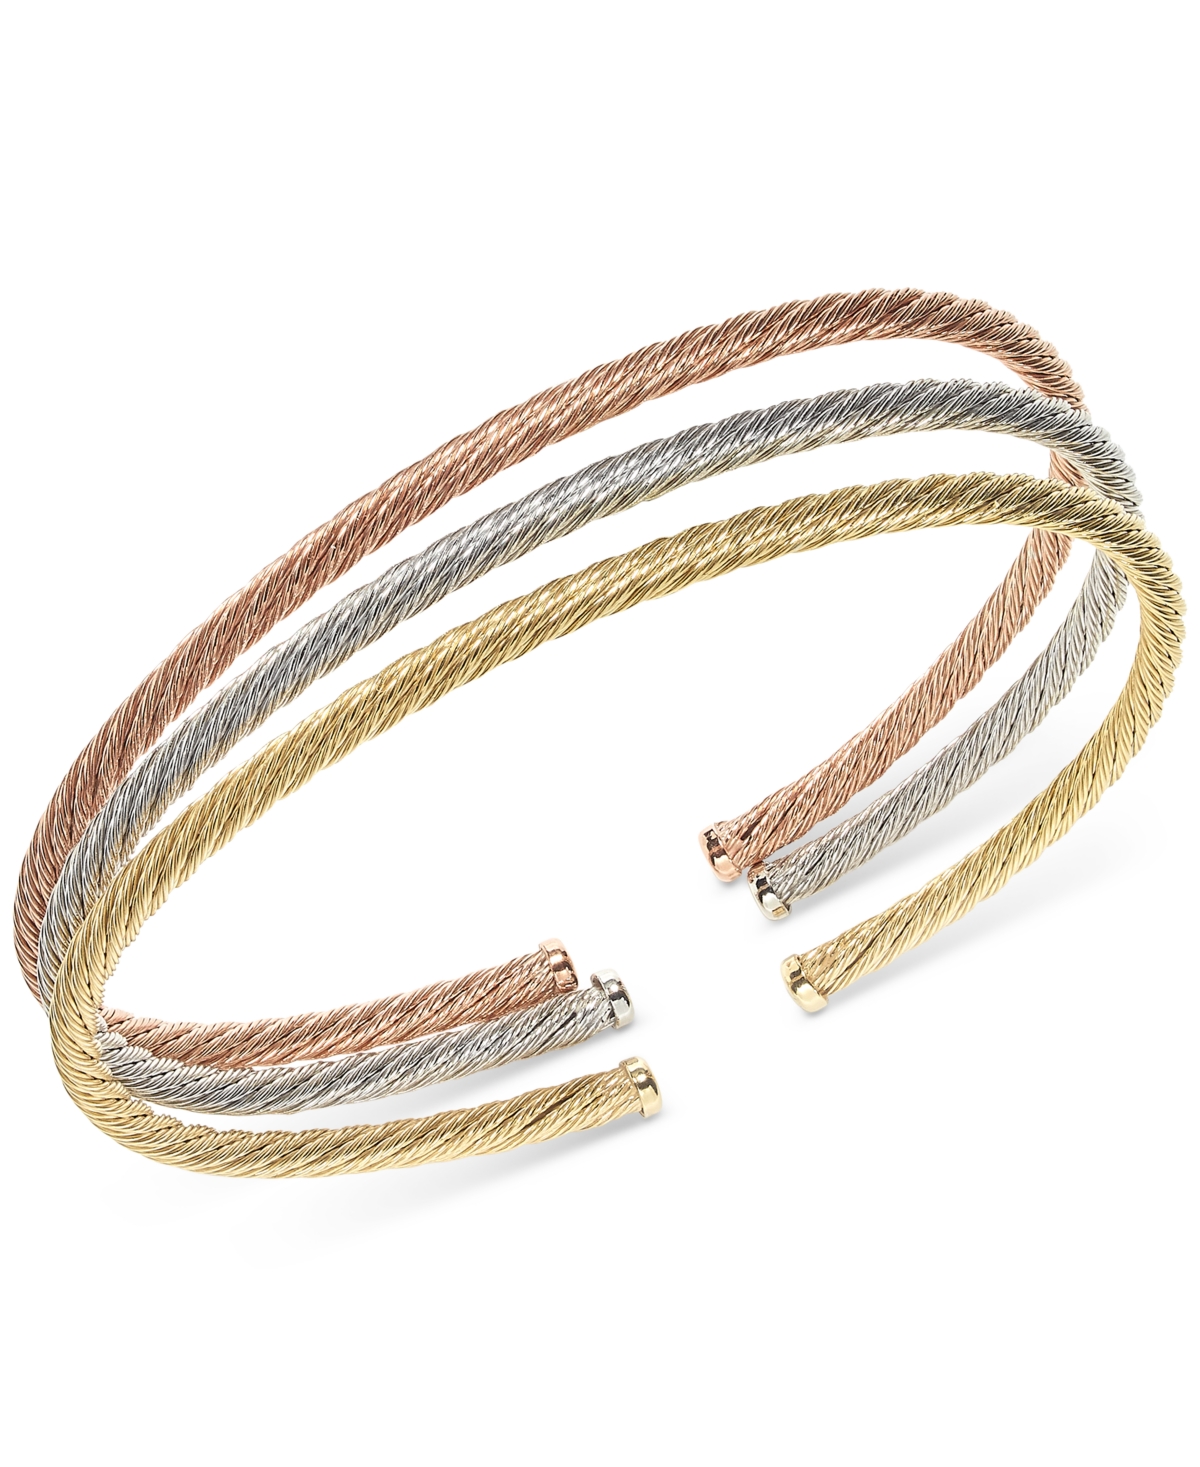 3-Pc. Set Twisted Cable Cuff Bracelets in 14k Tricolor Gold-Plated Sterling Silver - Tri-Color